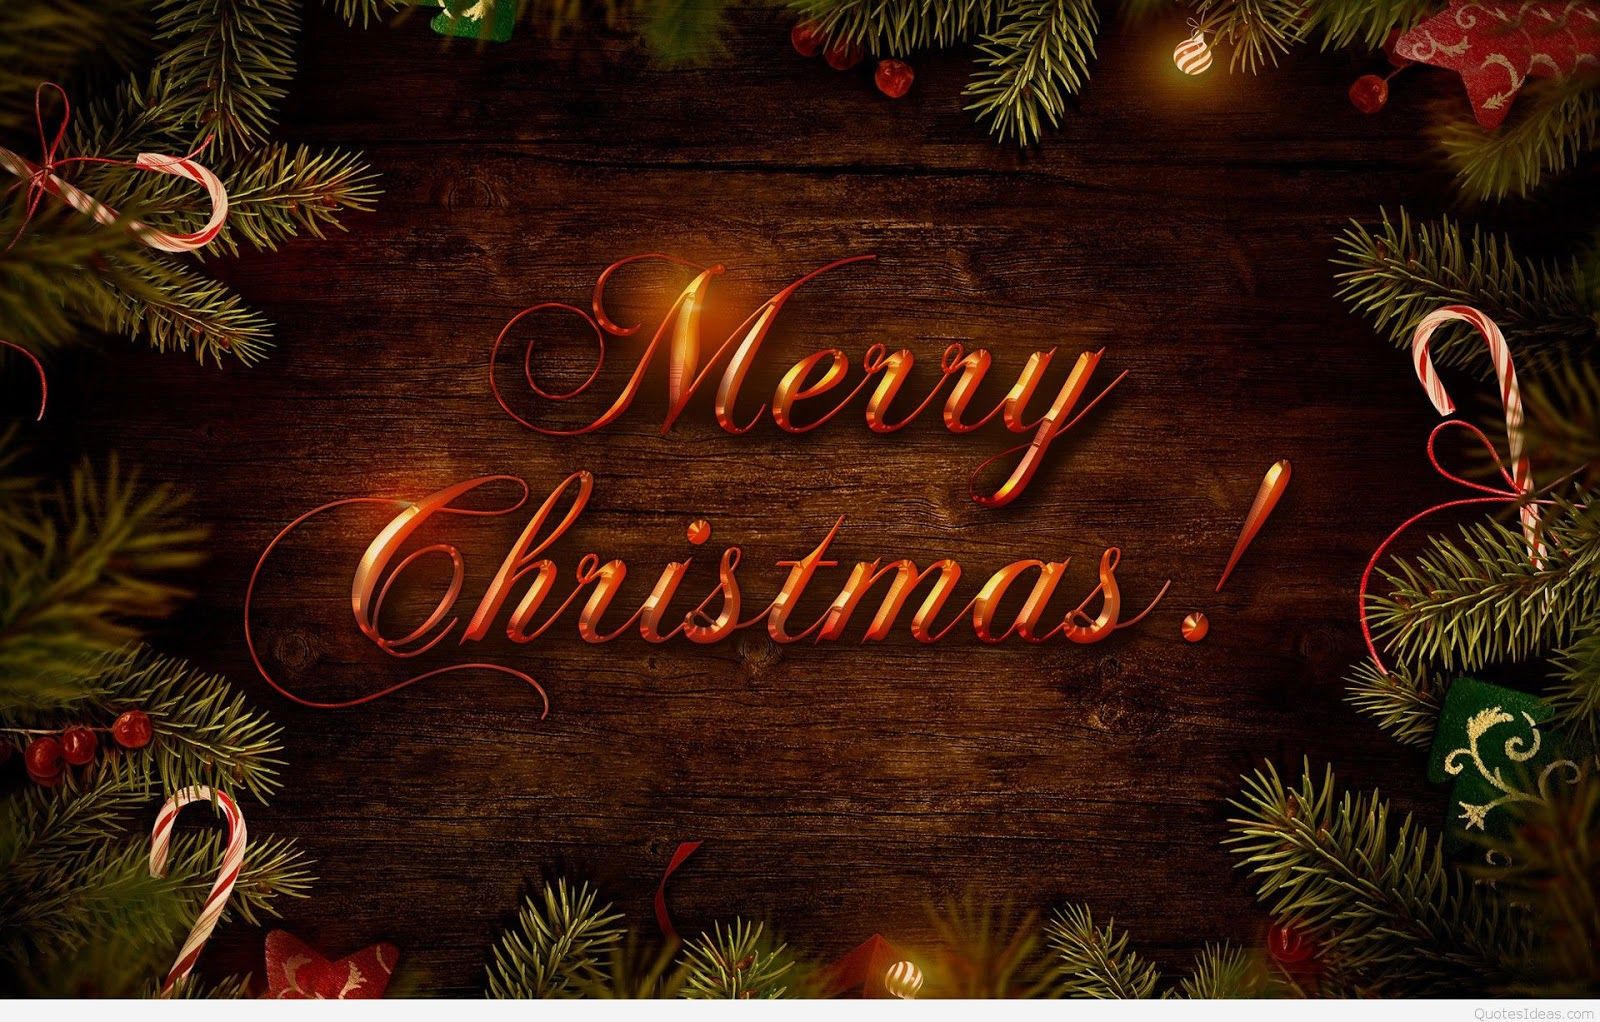 Merry Christmas Image Free Download 2018